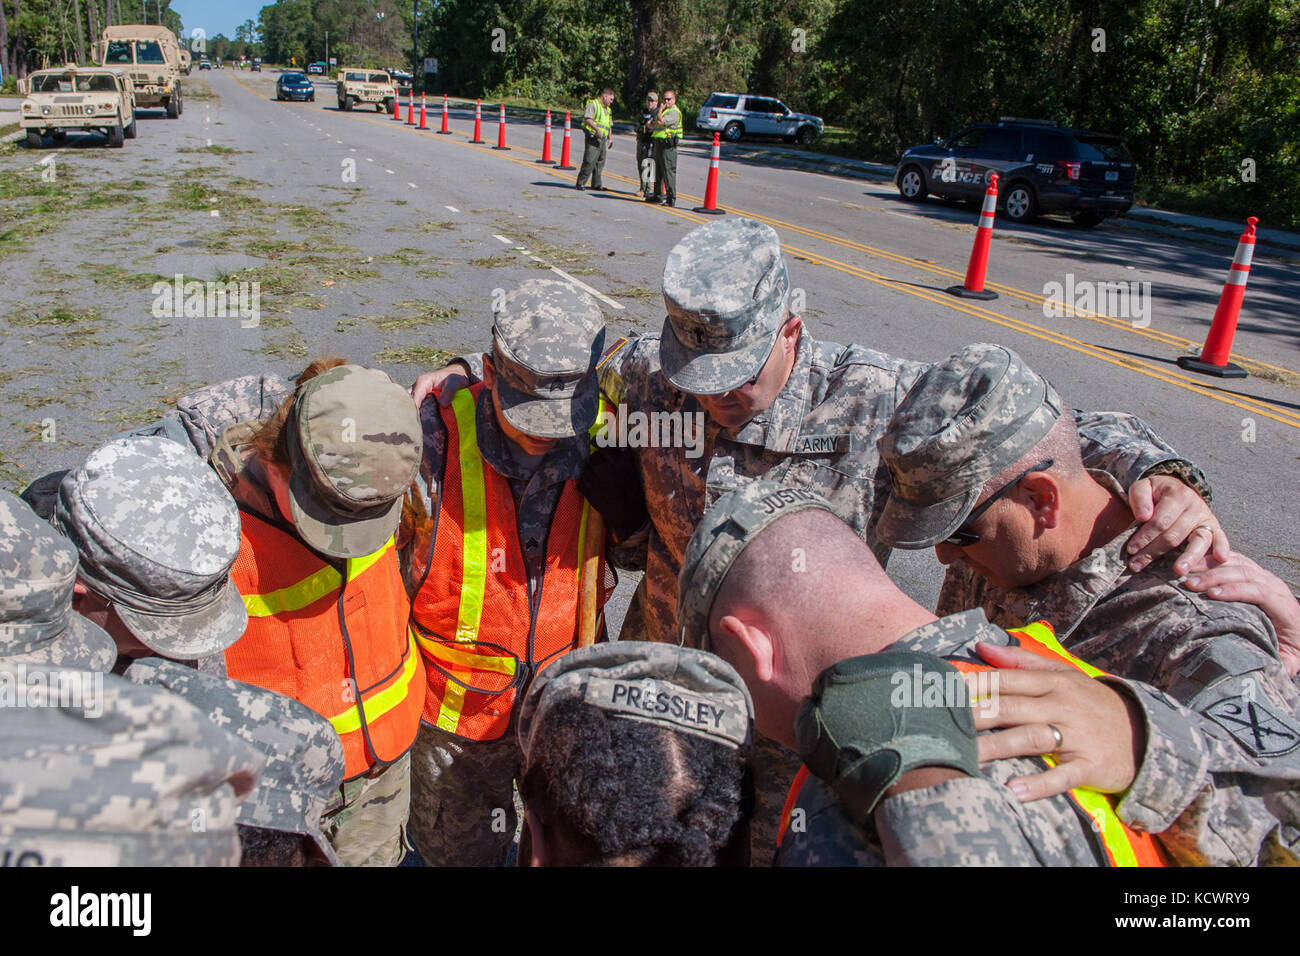 U.S. Army Chaplain, 1st Lt. Richard Brown of the 122nd Engineer Battalion for the South Carolina Army National Guard, leads a group of Soldiers in a moment prayer as they work to remove debris and clear the roadways in Bluffton, South Carolina, Oct. 9, 2016. Approximately 2,800 S.C. National Guard Soldiers and Airmen have been activated since Oct. 4, 2016, to support state and county emergency management agencies and local first responders after Governor Nikki Haley declared a State of Emergency. (U.S. Army National Guard photos by Sgt. Brian Calhoun, 108th Public Affairs Detachment) Stock Photo